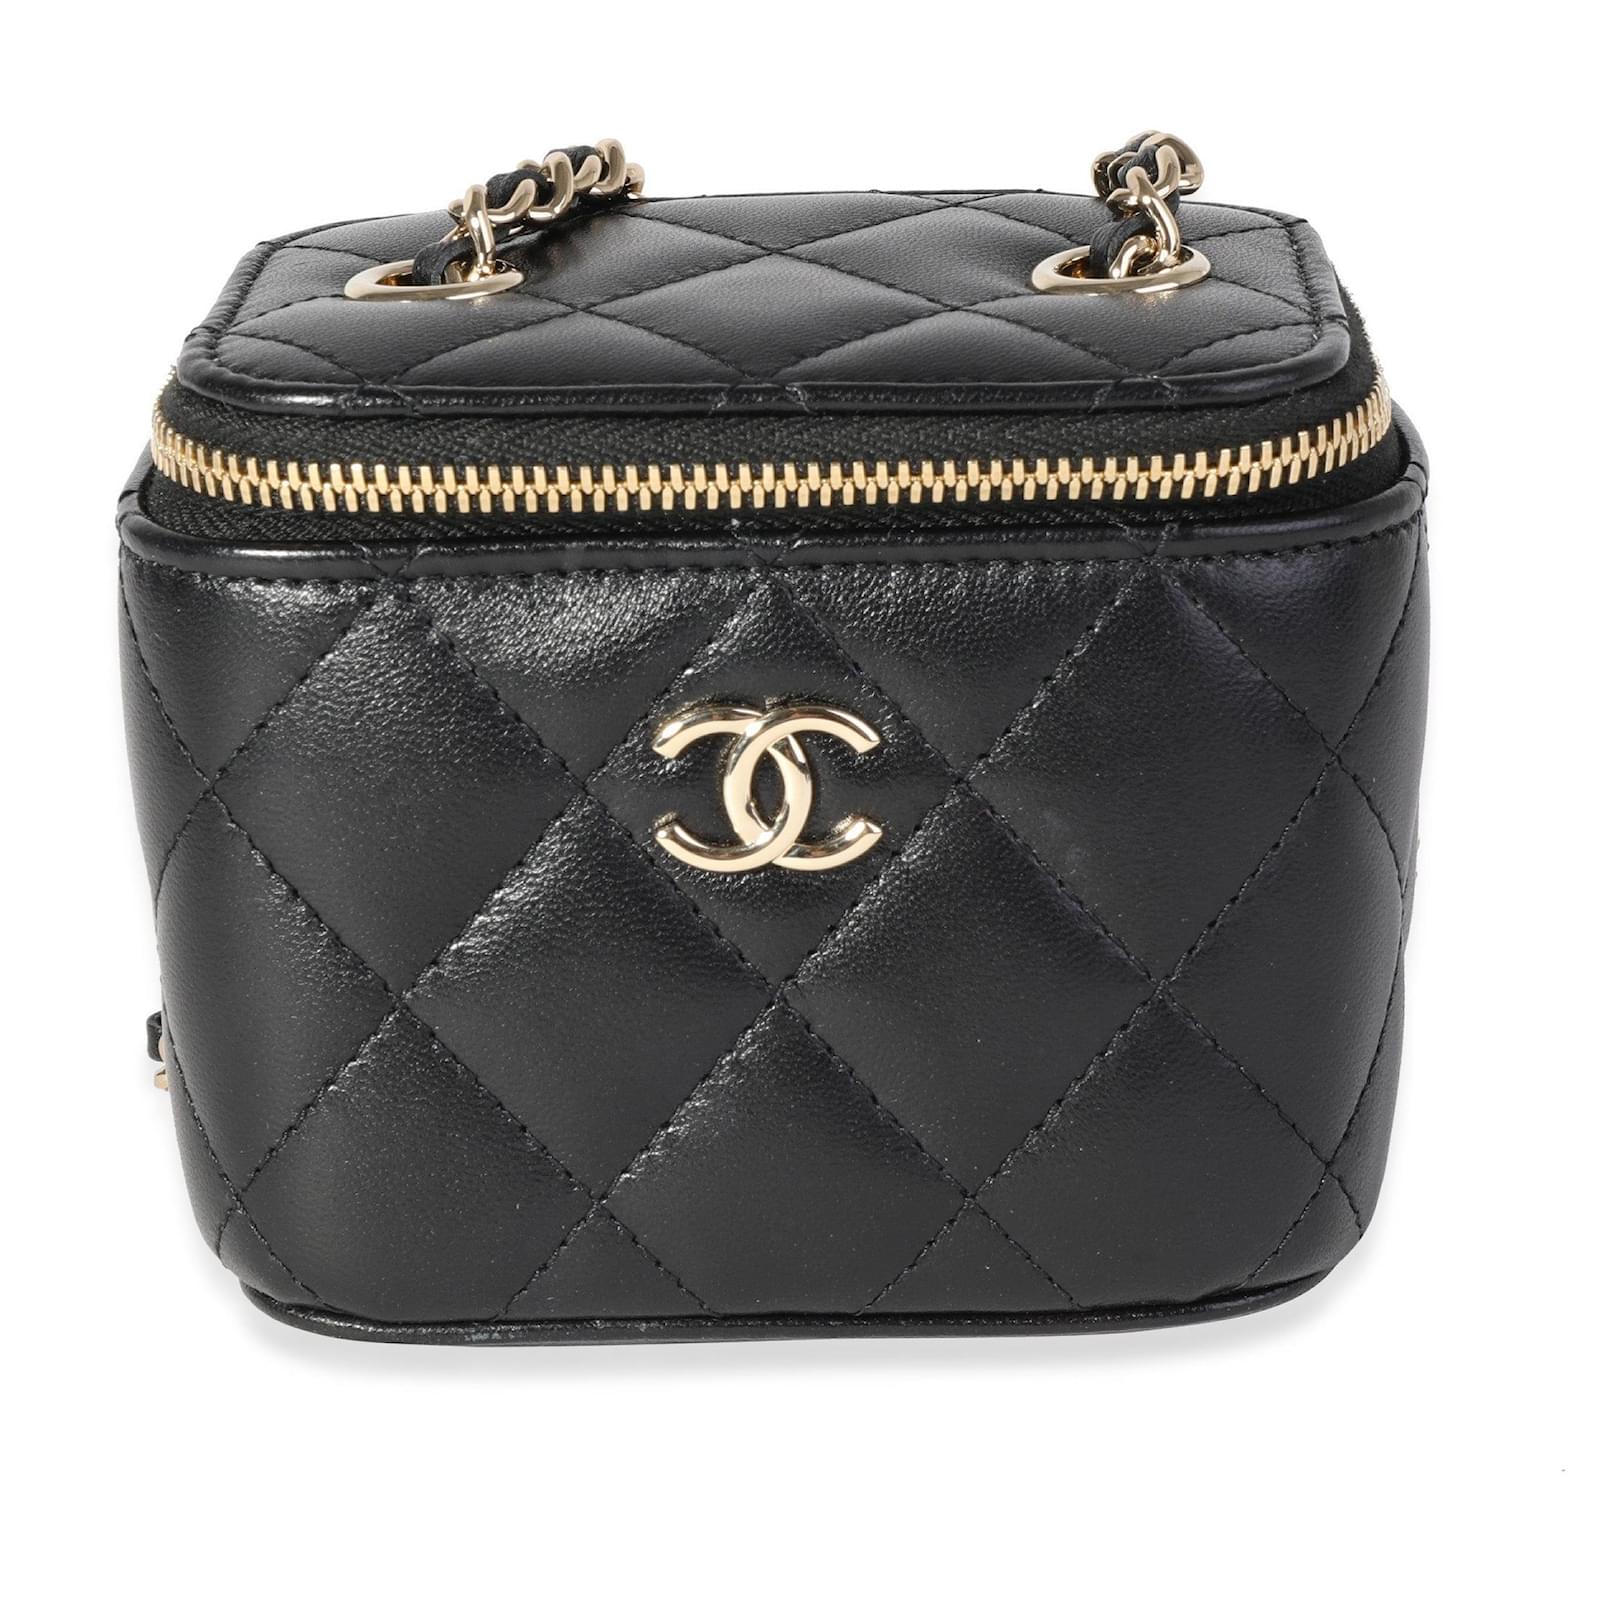 Chanel Black Quilted Lambskin Mini Vanity Case With Chain Leather